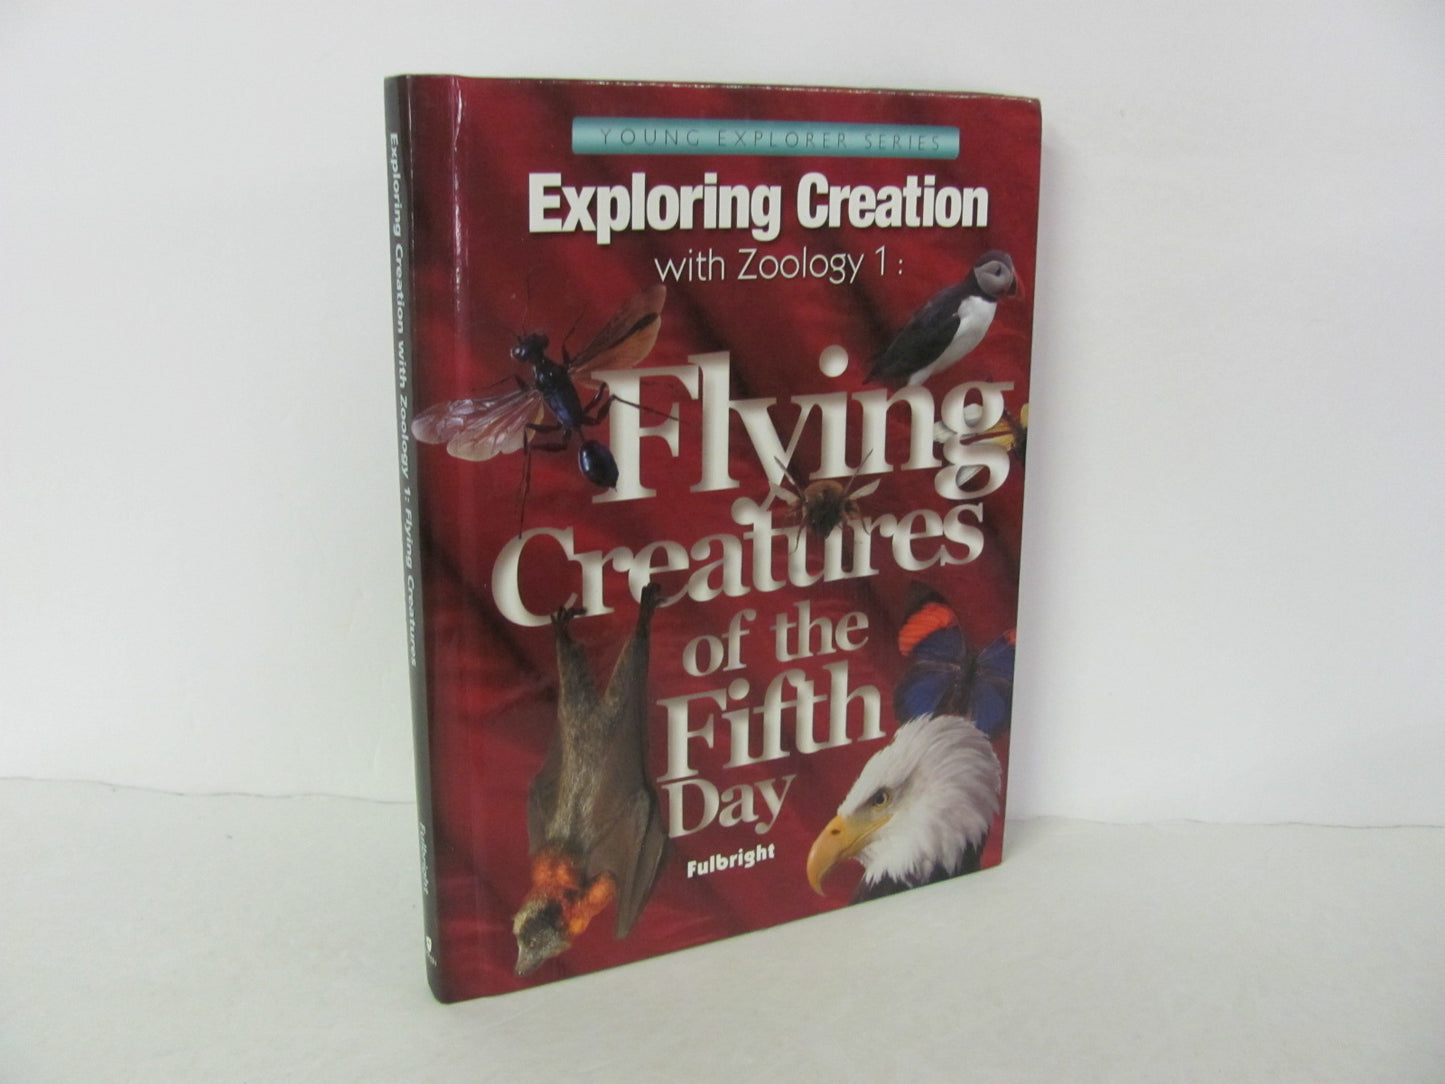 Flying Creatures of the 5th Da Apologia Student Book Pre-Owned Science Textbooks